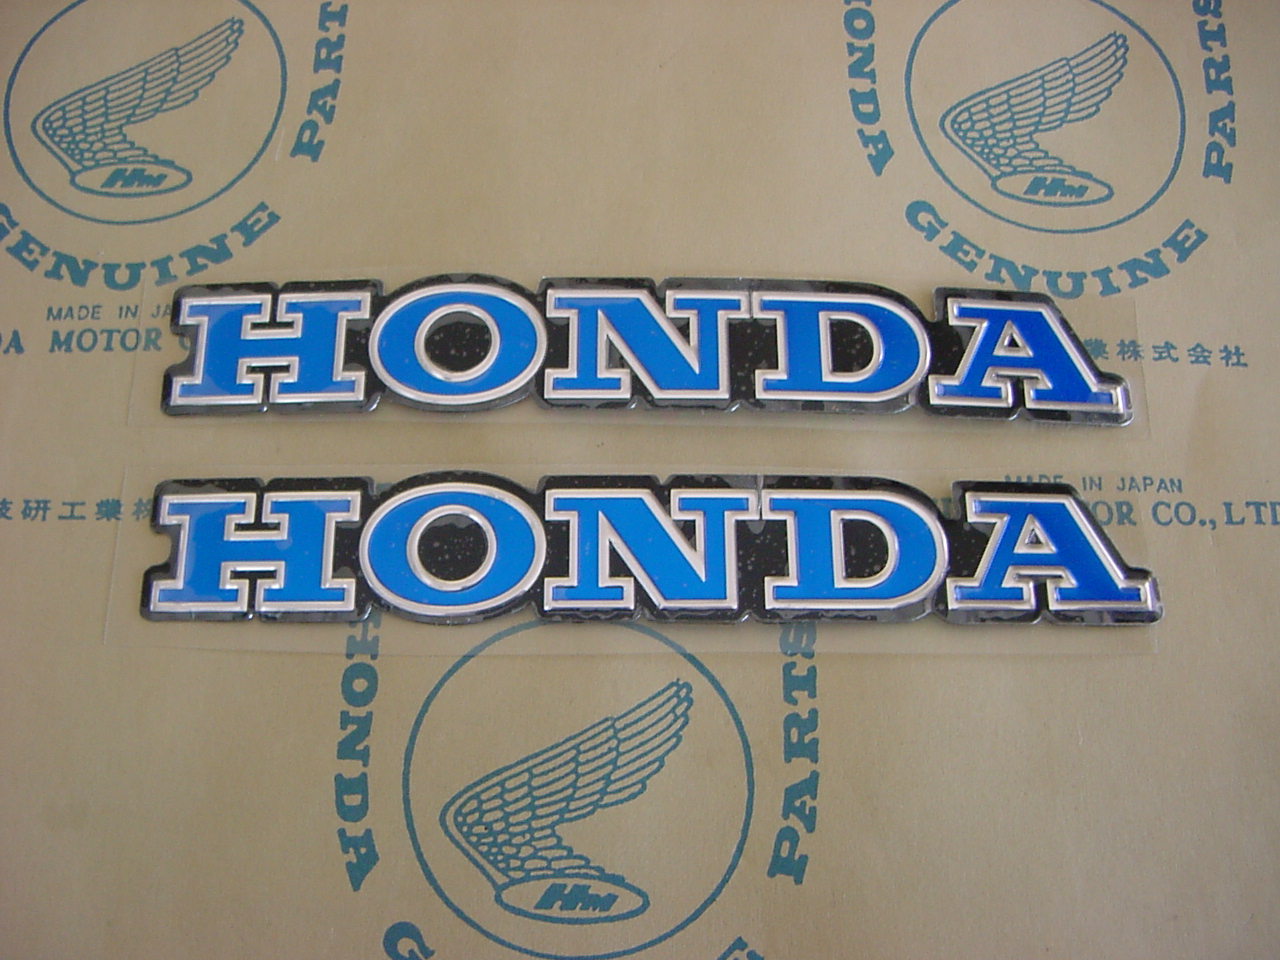 87123-118-000AM | THIS IS A REMAKE EMBLEM. THIS IS LIKE THE EMBLEM THAT CAME ON THE SL70 MOTORCYCLE. THIS IS NOT A CHEAP STICKER. THIS IS FOR HONDA SL70 1971, 1972 ONLY.
A SET OF (2) EMBLEMS IS $75.00.